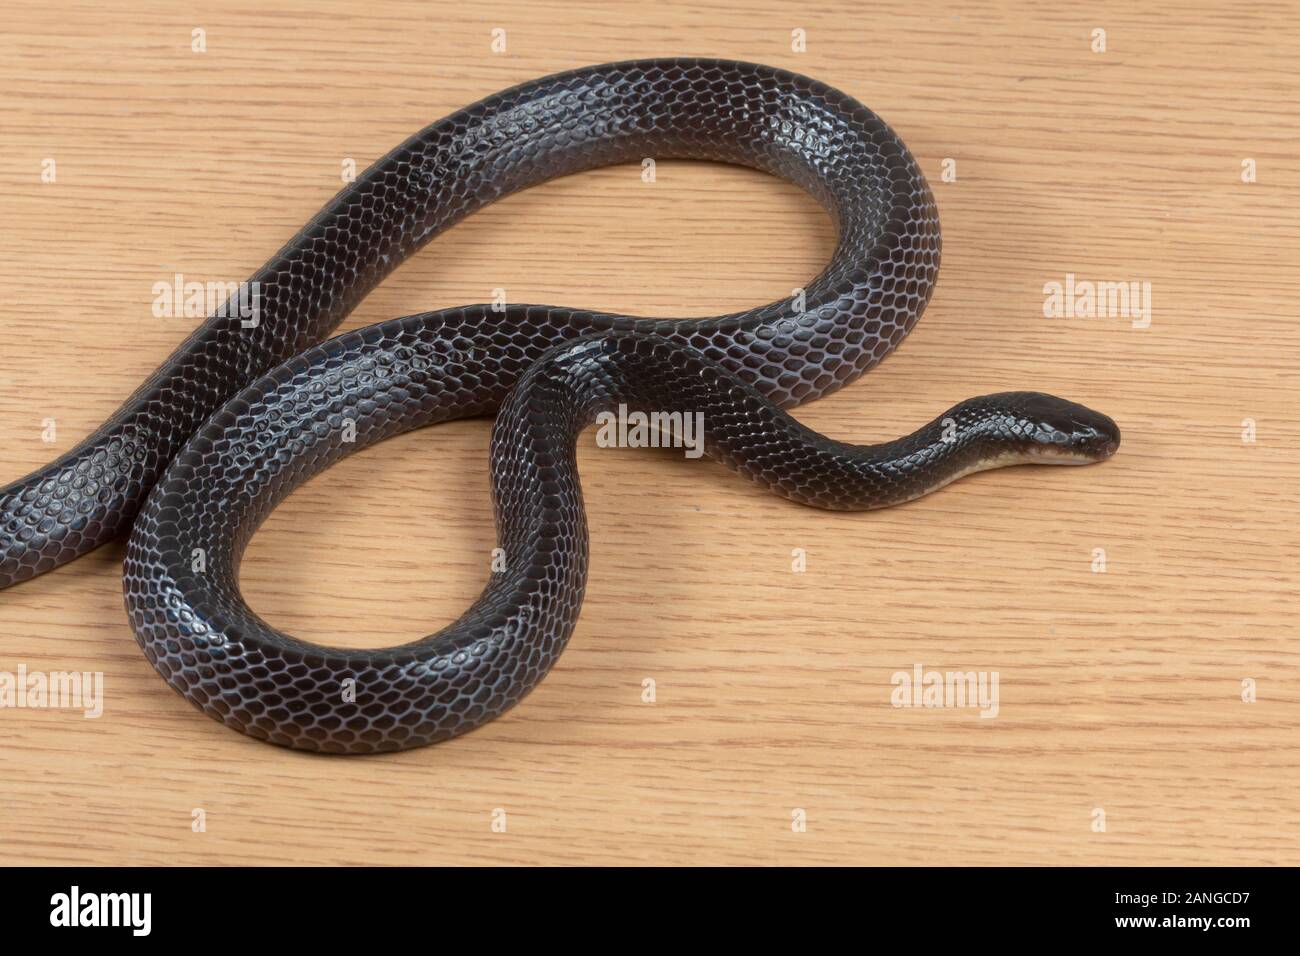 Greater black krait, Bungarus niger venomous snake in the family Elapidae. The species is endemic to South Asia. Stock Photo